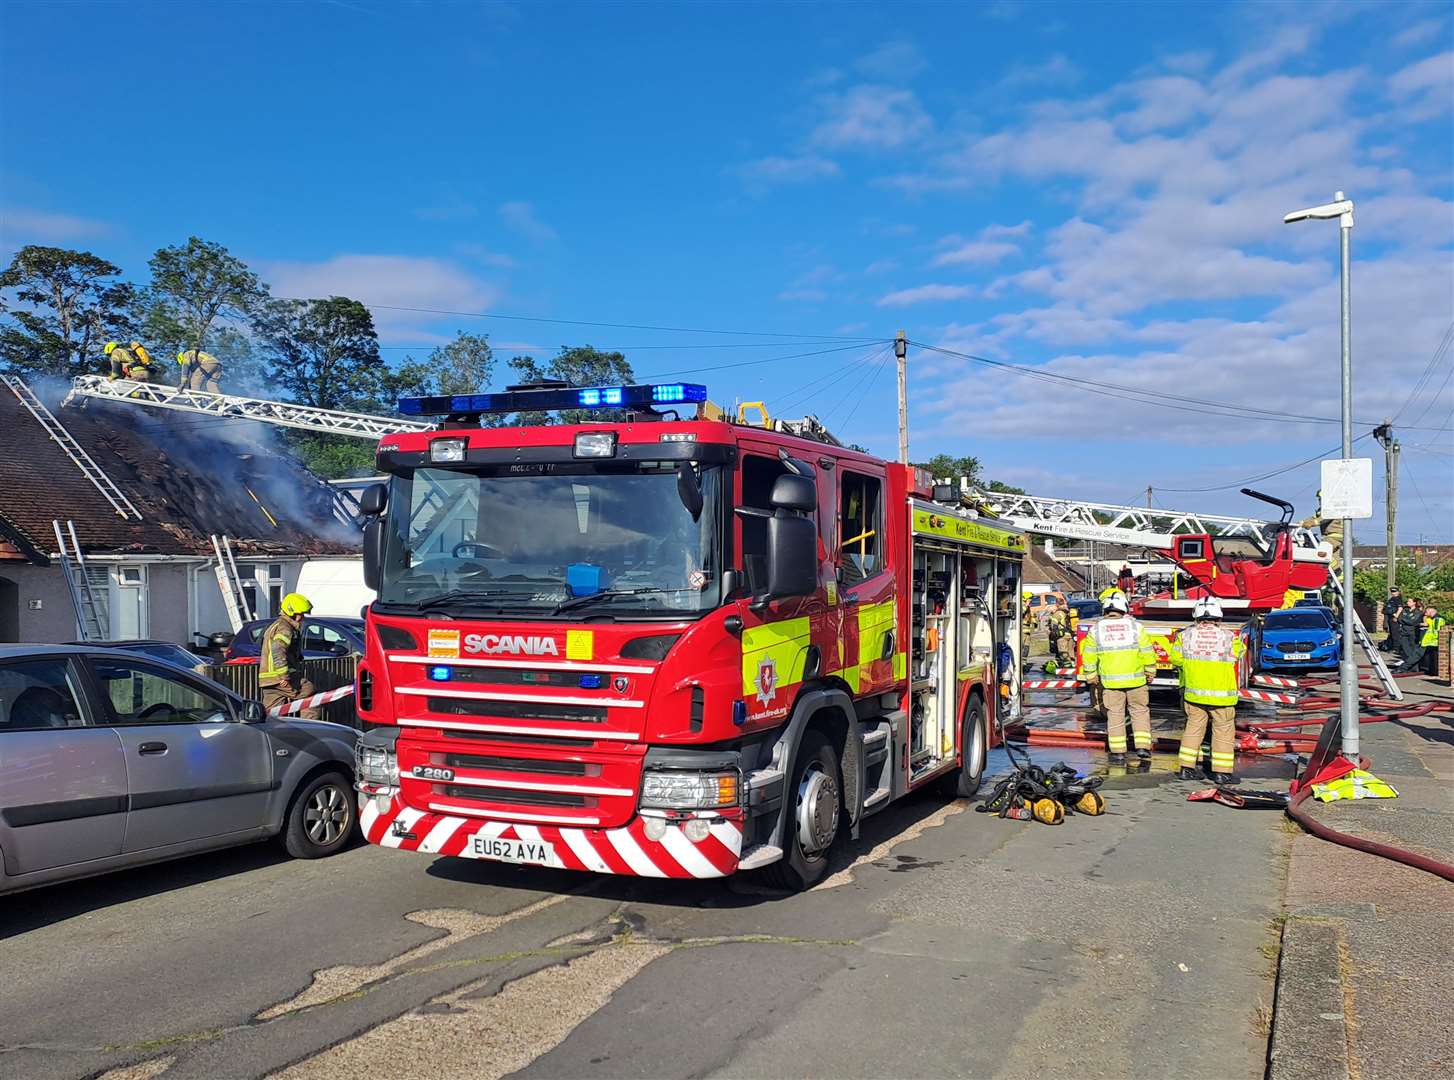 Six fire engines and other specialist fire service vehicles were seen at the scene